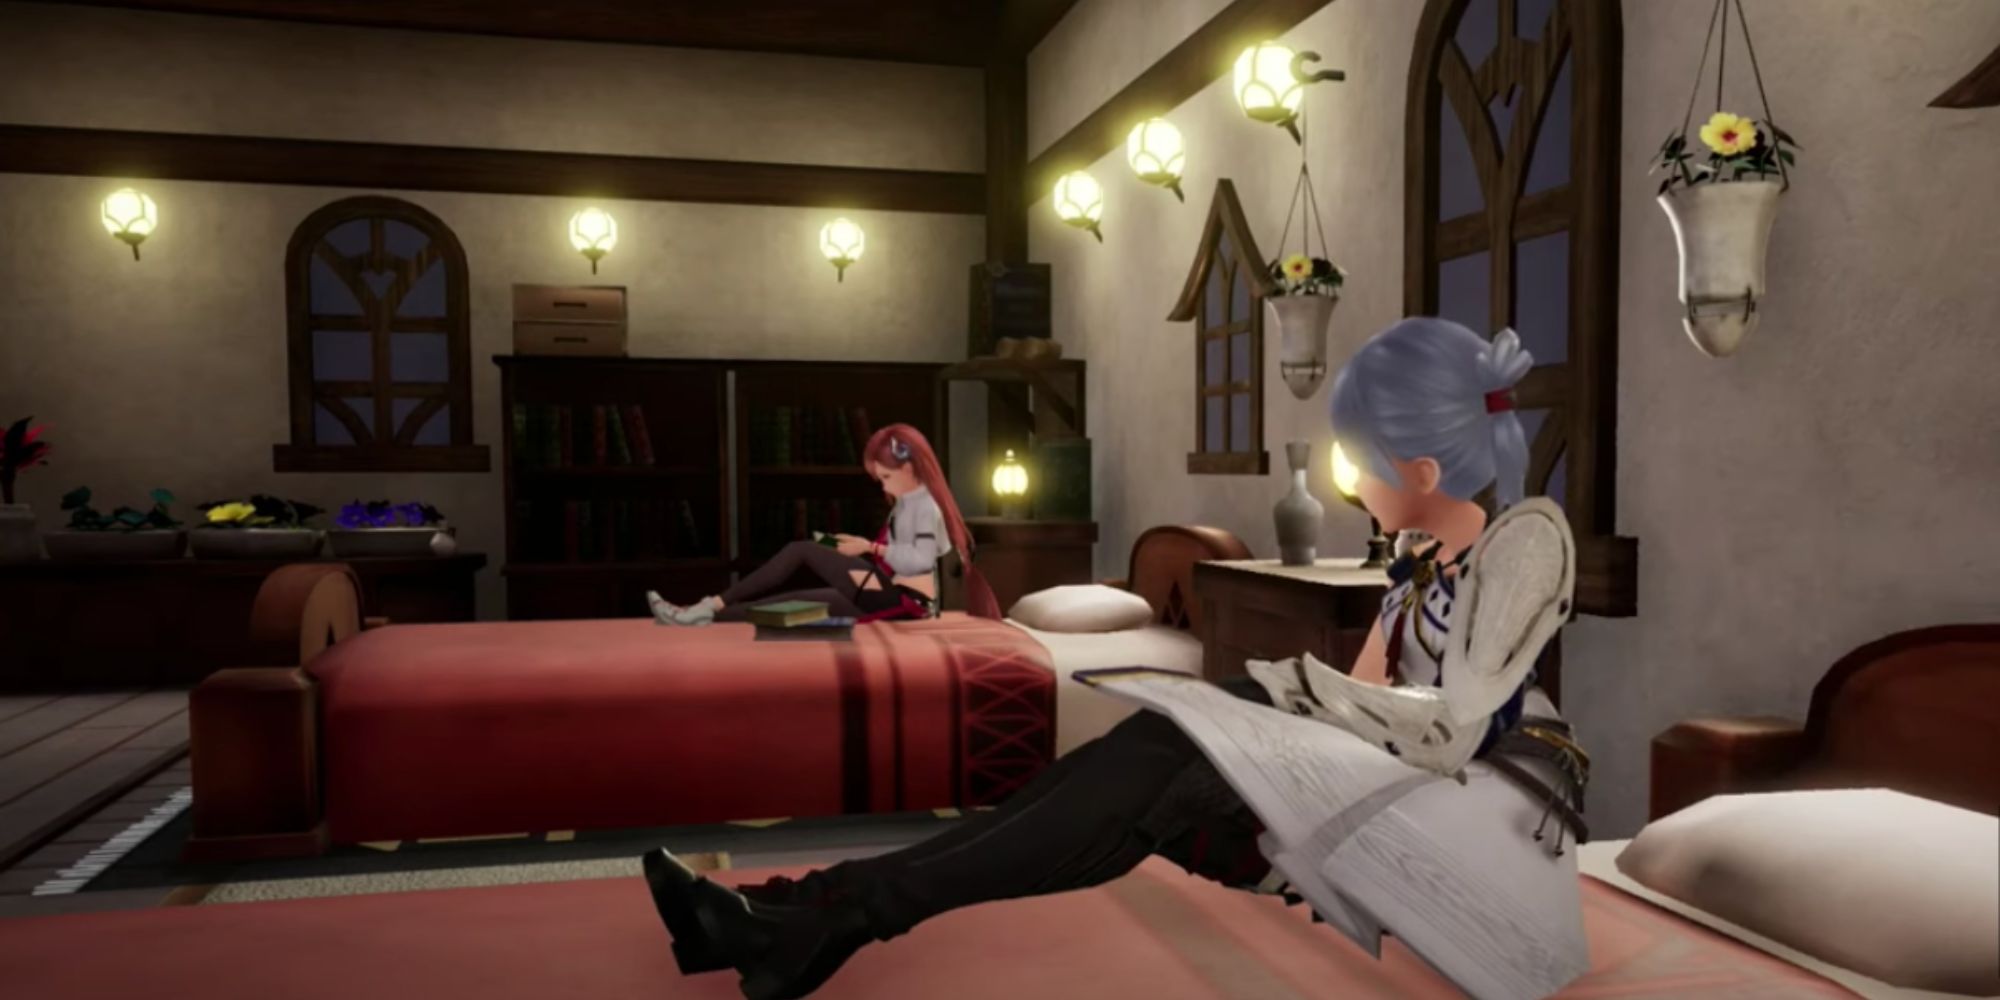 Aria and main character in their two respective beds